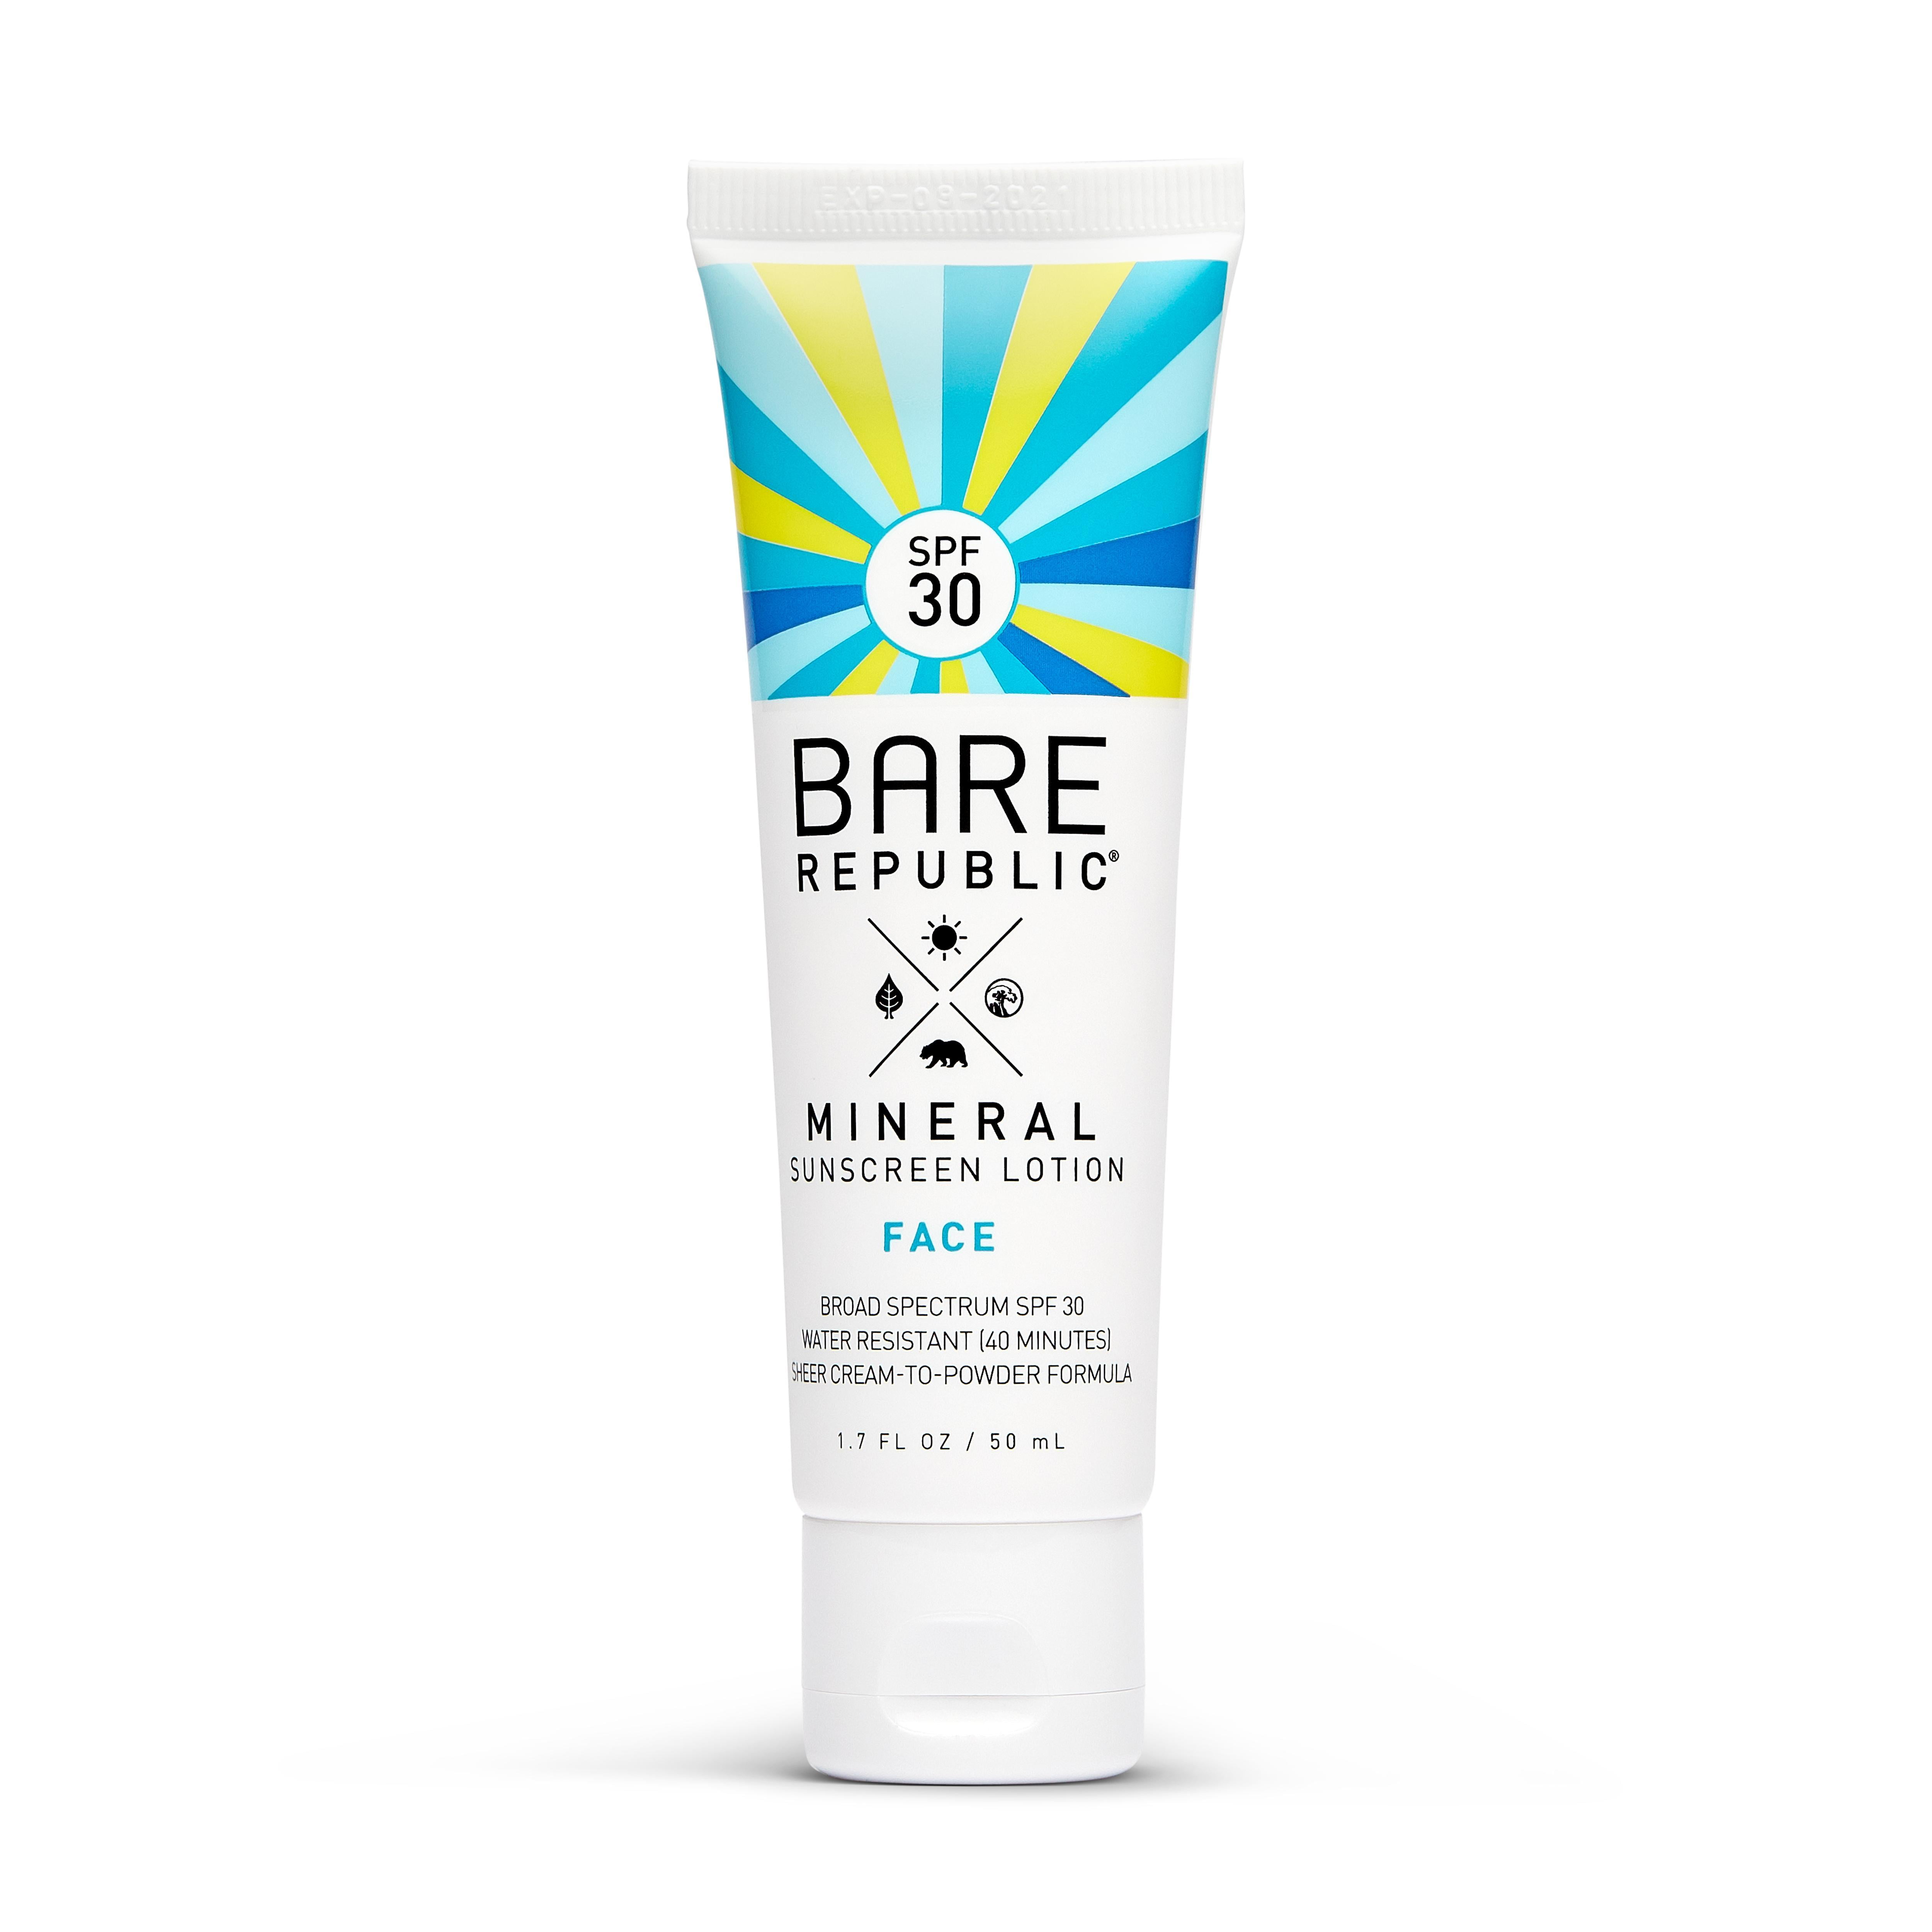 Bare Republic Mineral Face Sunscreen Lotion, SPF 30, Reef Friendly ...